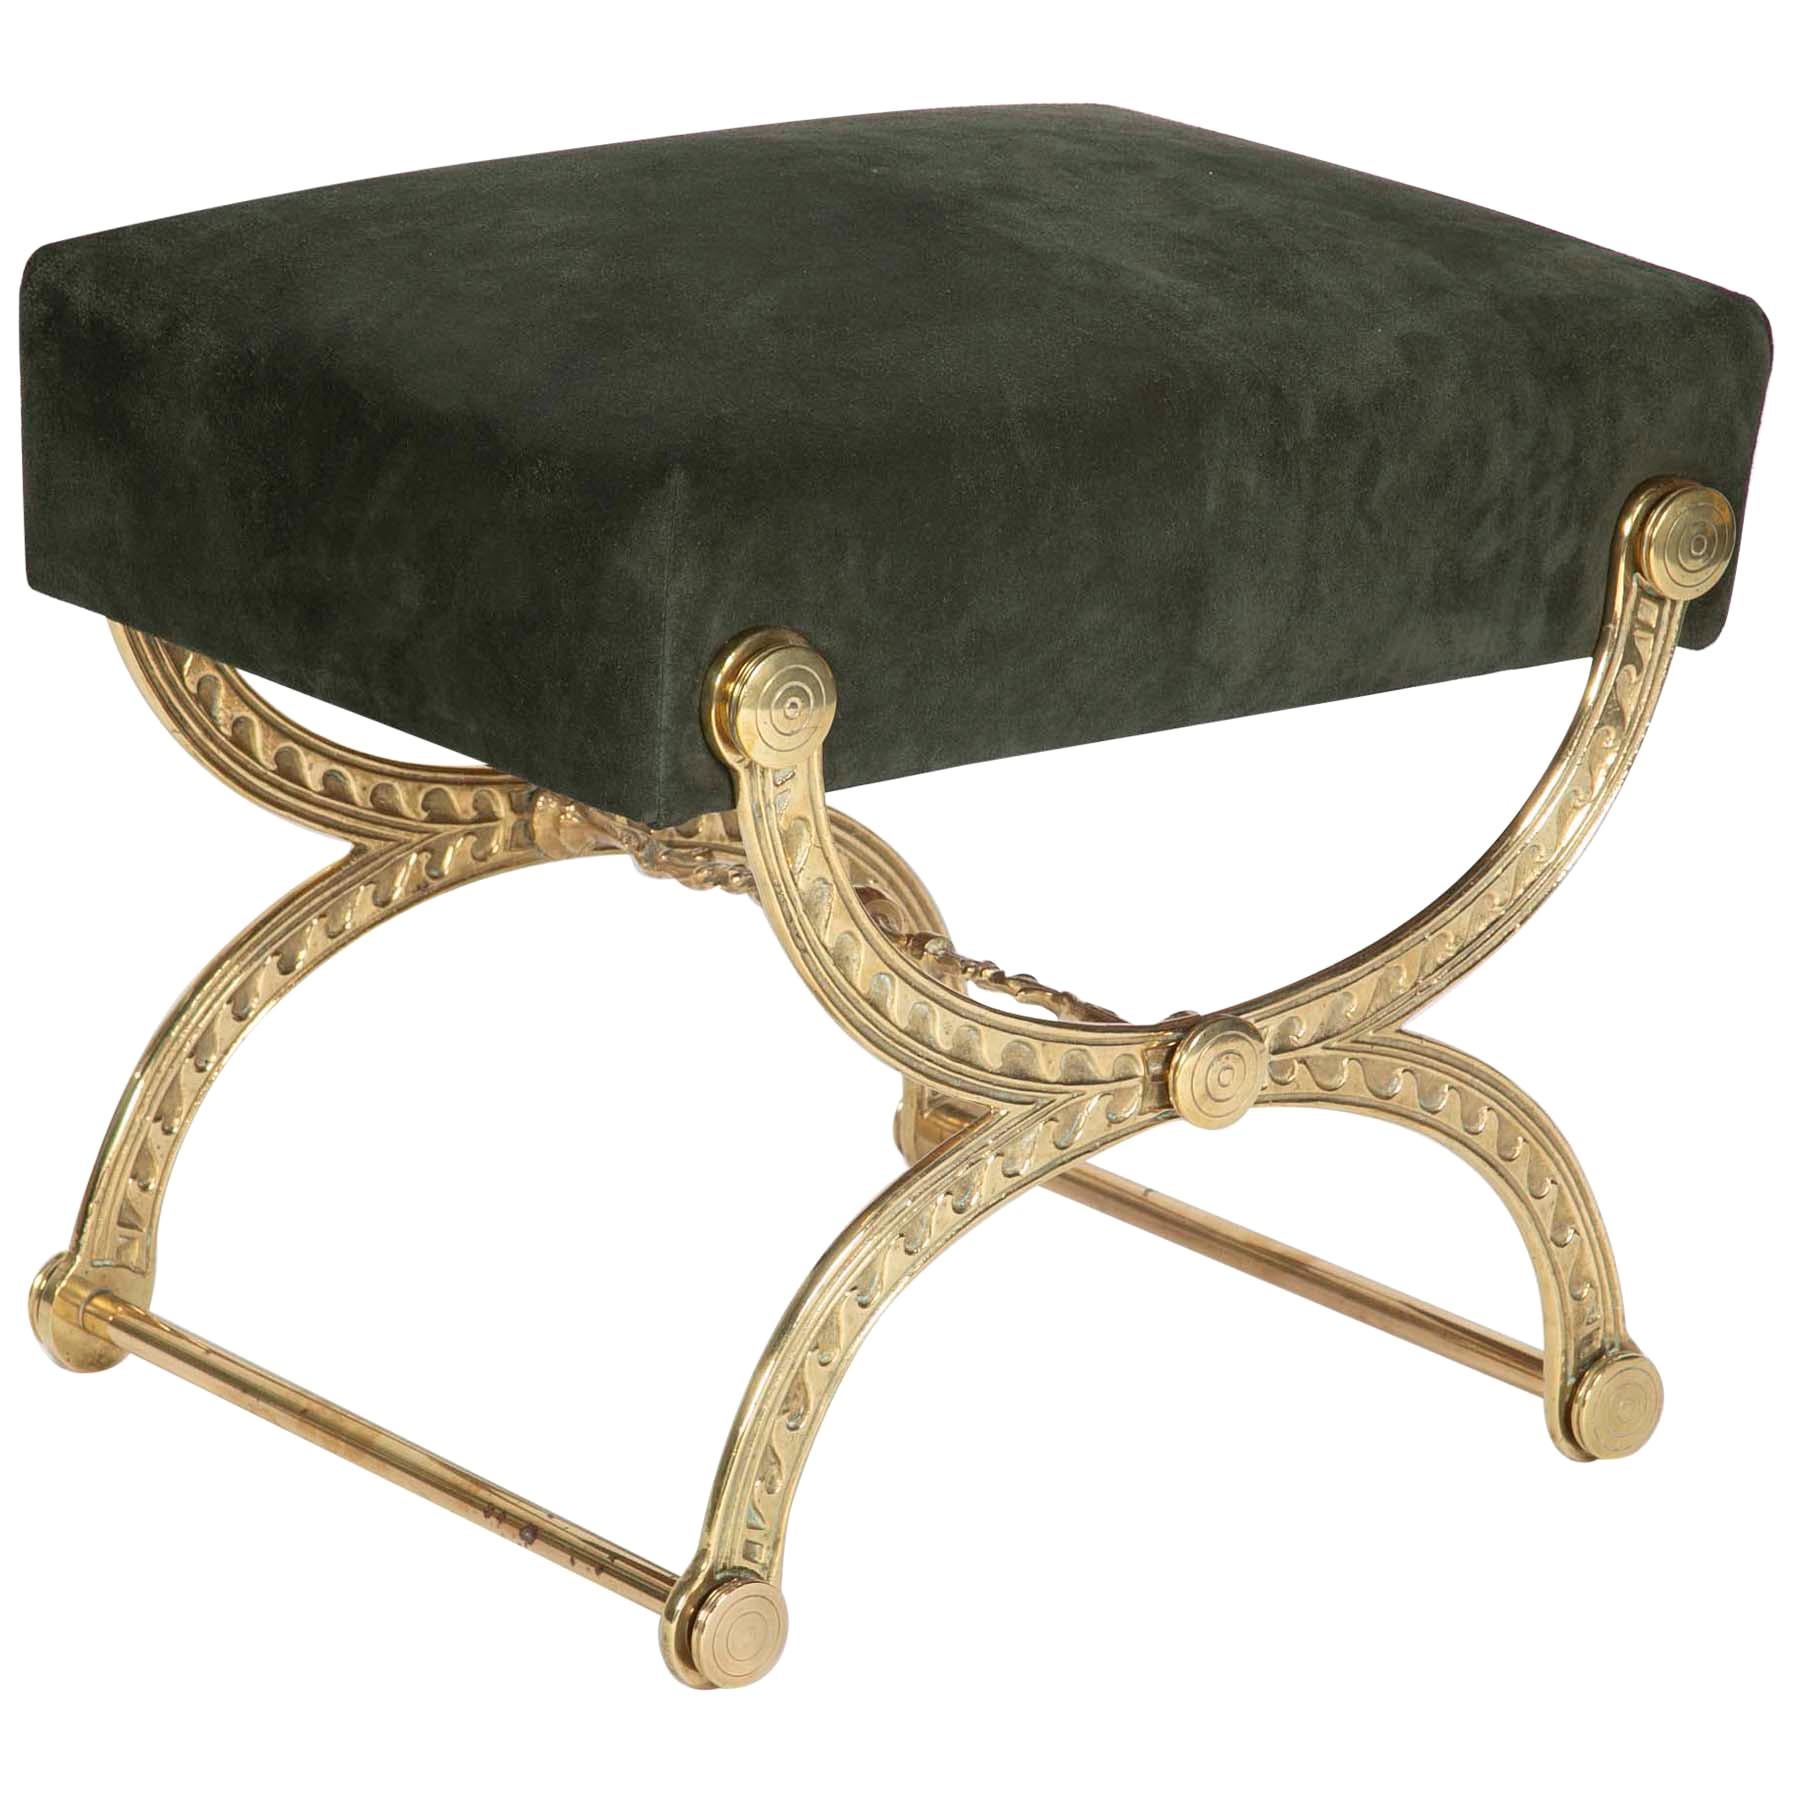 Brass and Suede Curule Form Neoclassical Style Stool with Vitruvian Wave Motif